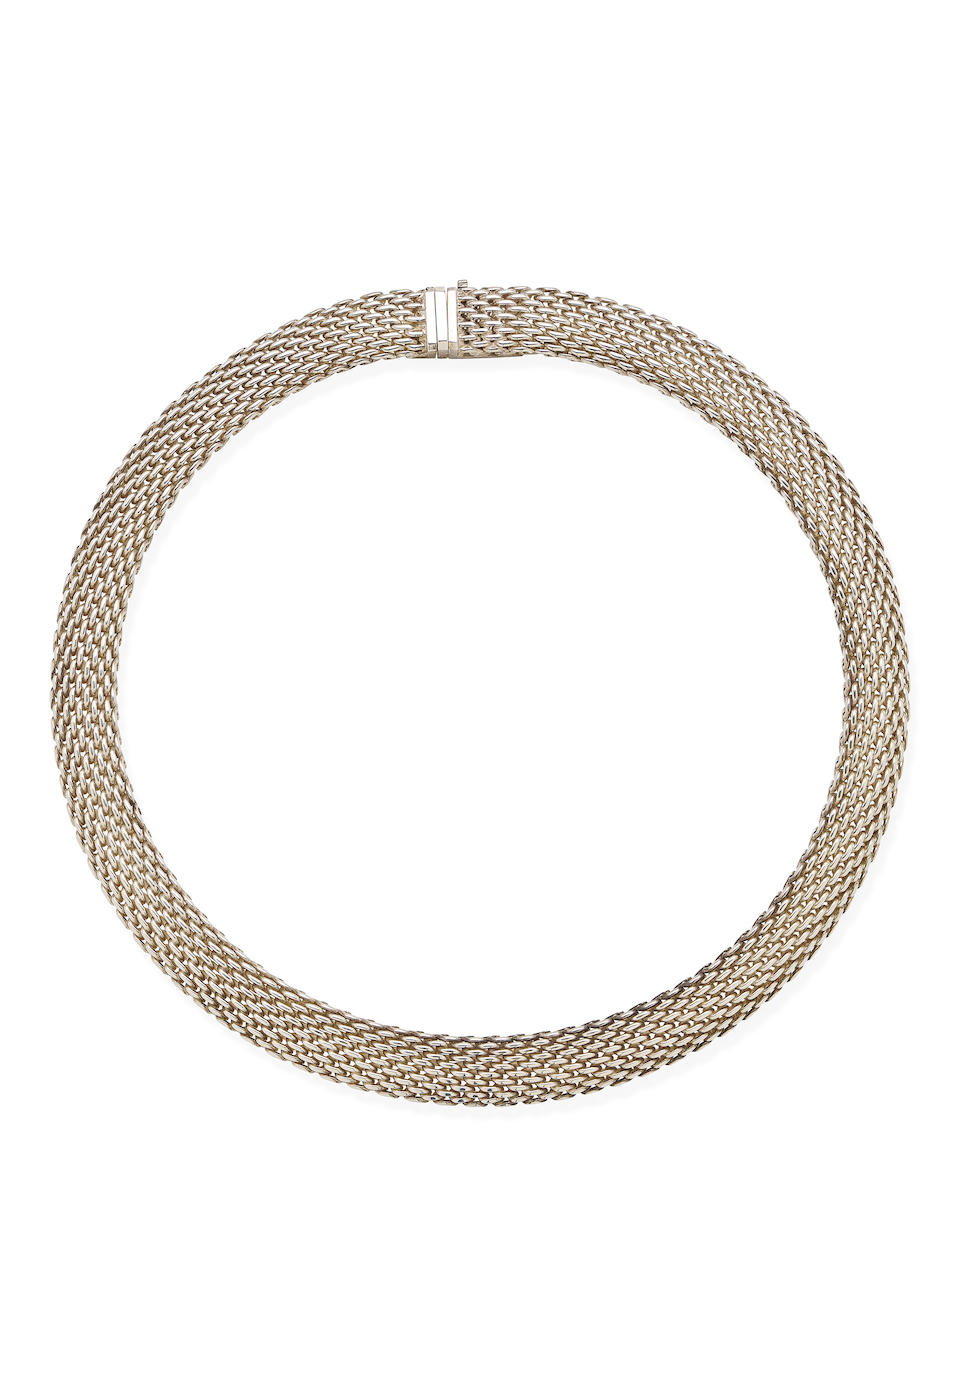 TIFFANY & CO | SOMERSET STERLING SILVER MESH COLLAR NECKLACE